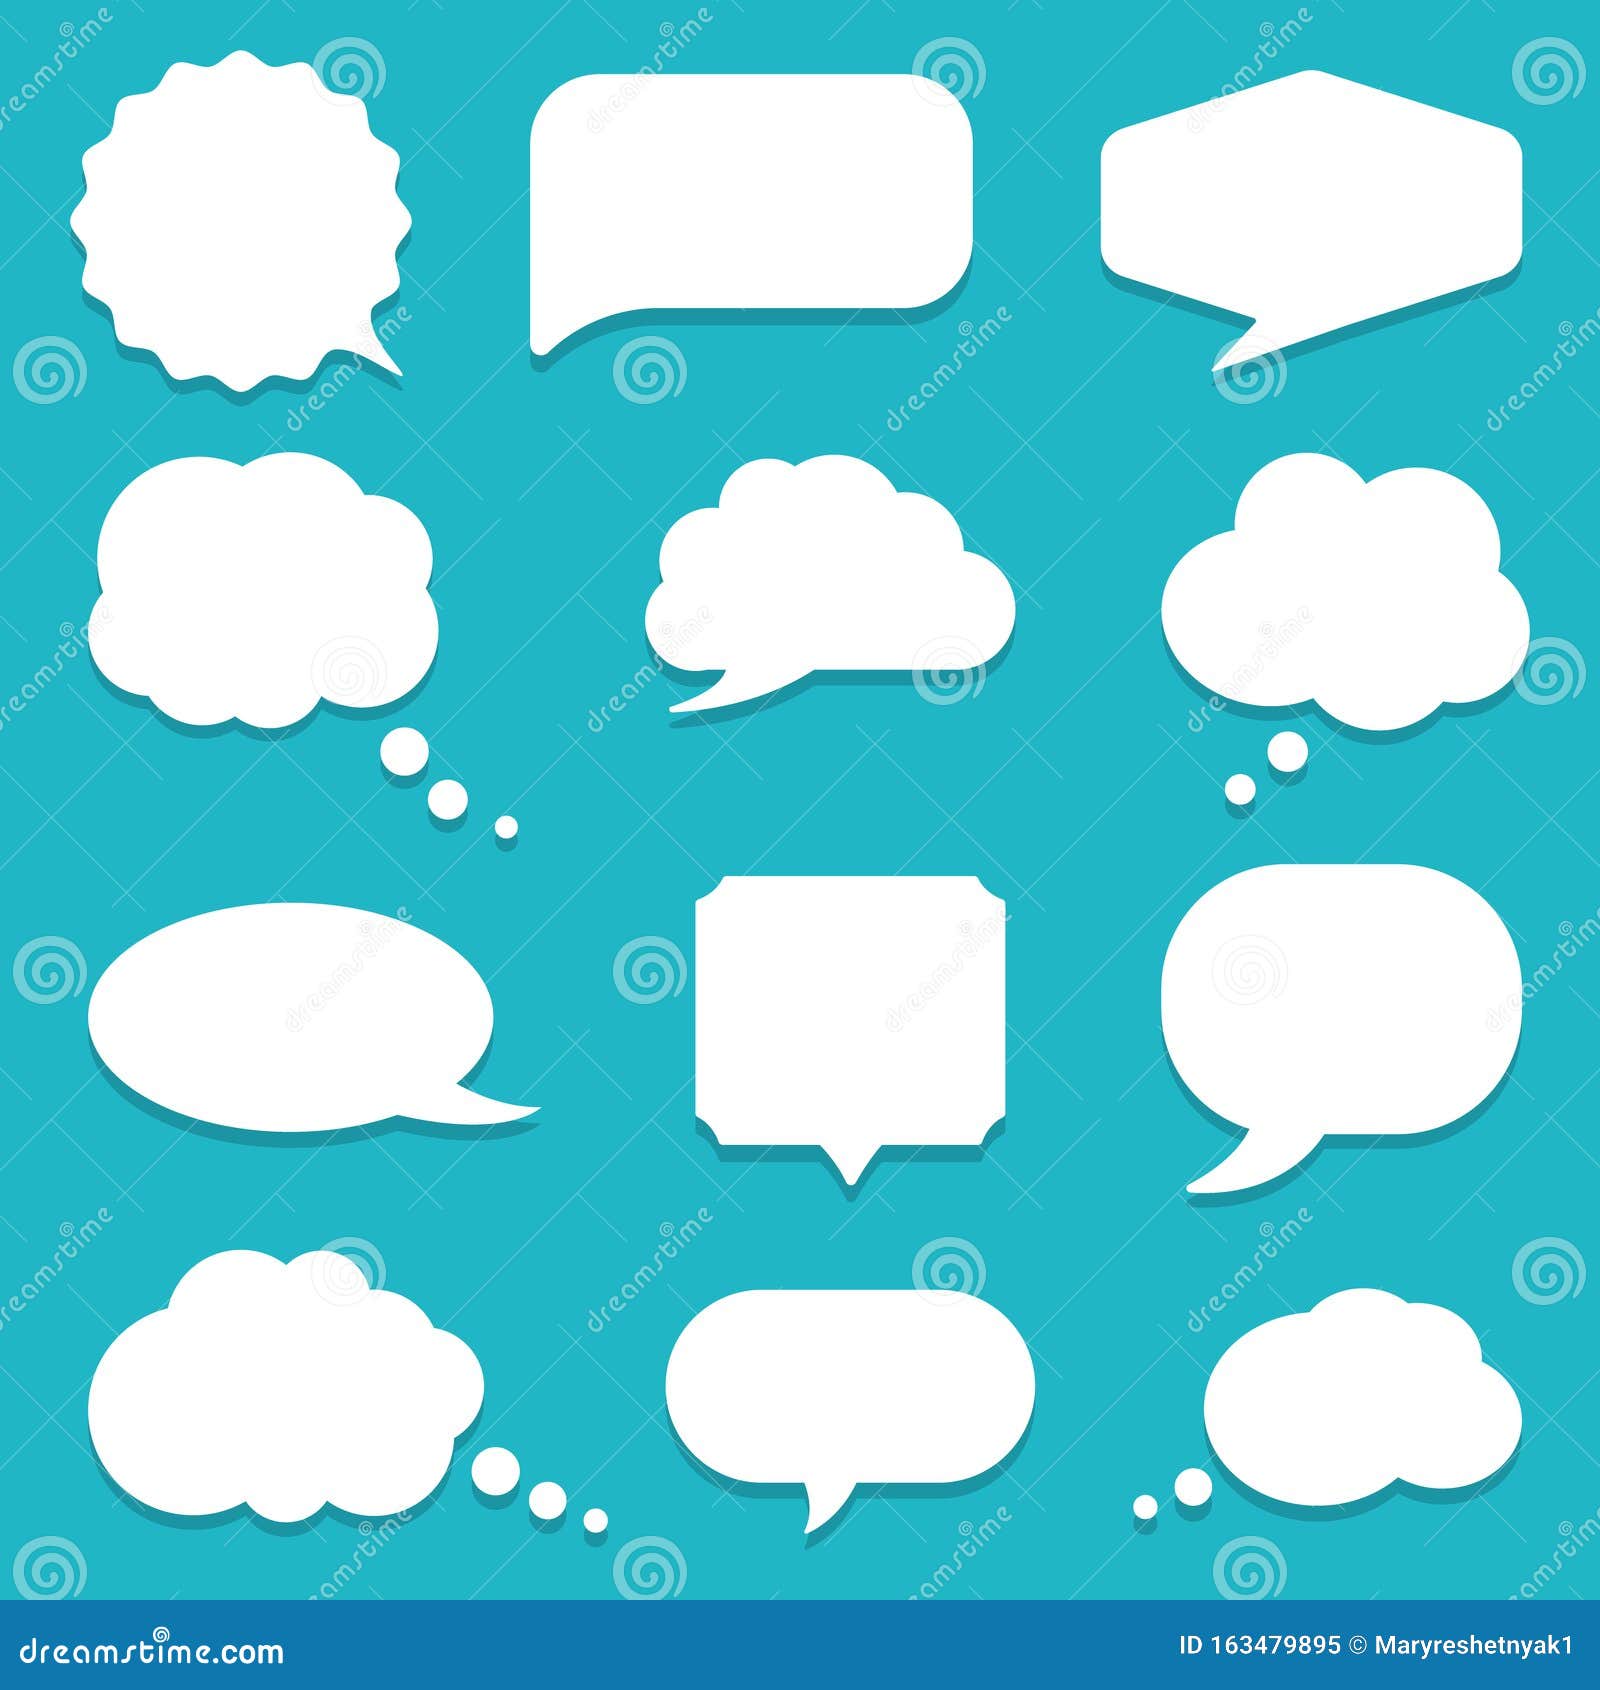 set of speech bubble, textbox cloud of chat for comment, post, comic. dialog box icon, message template. different  of empty